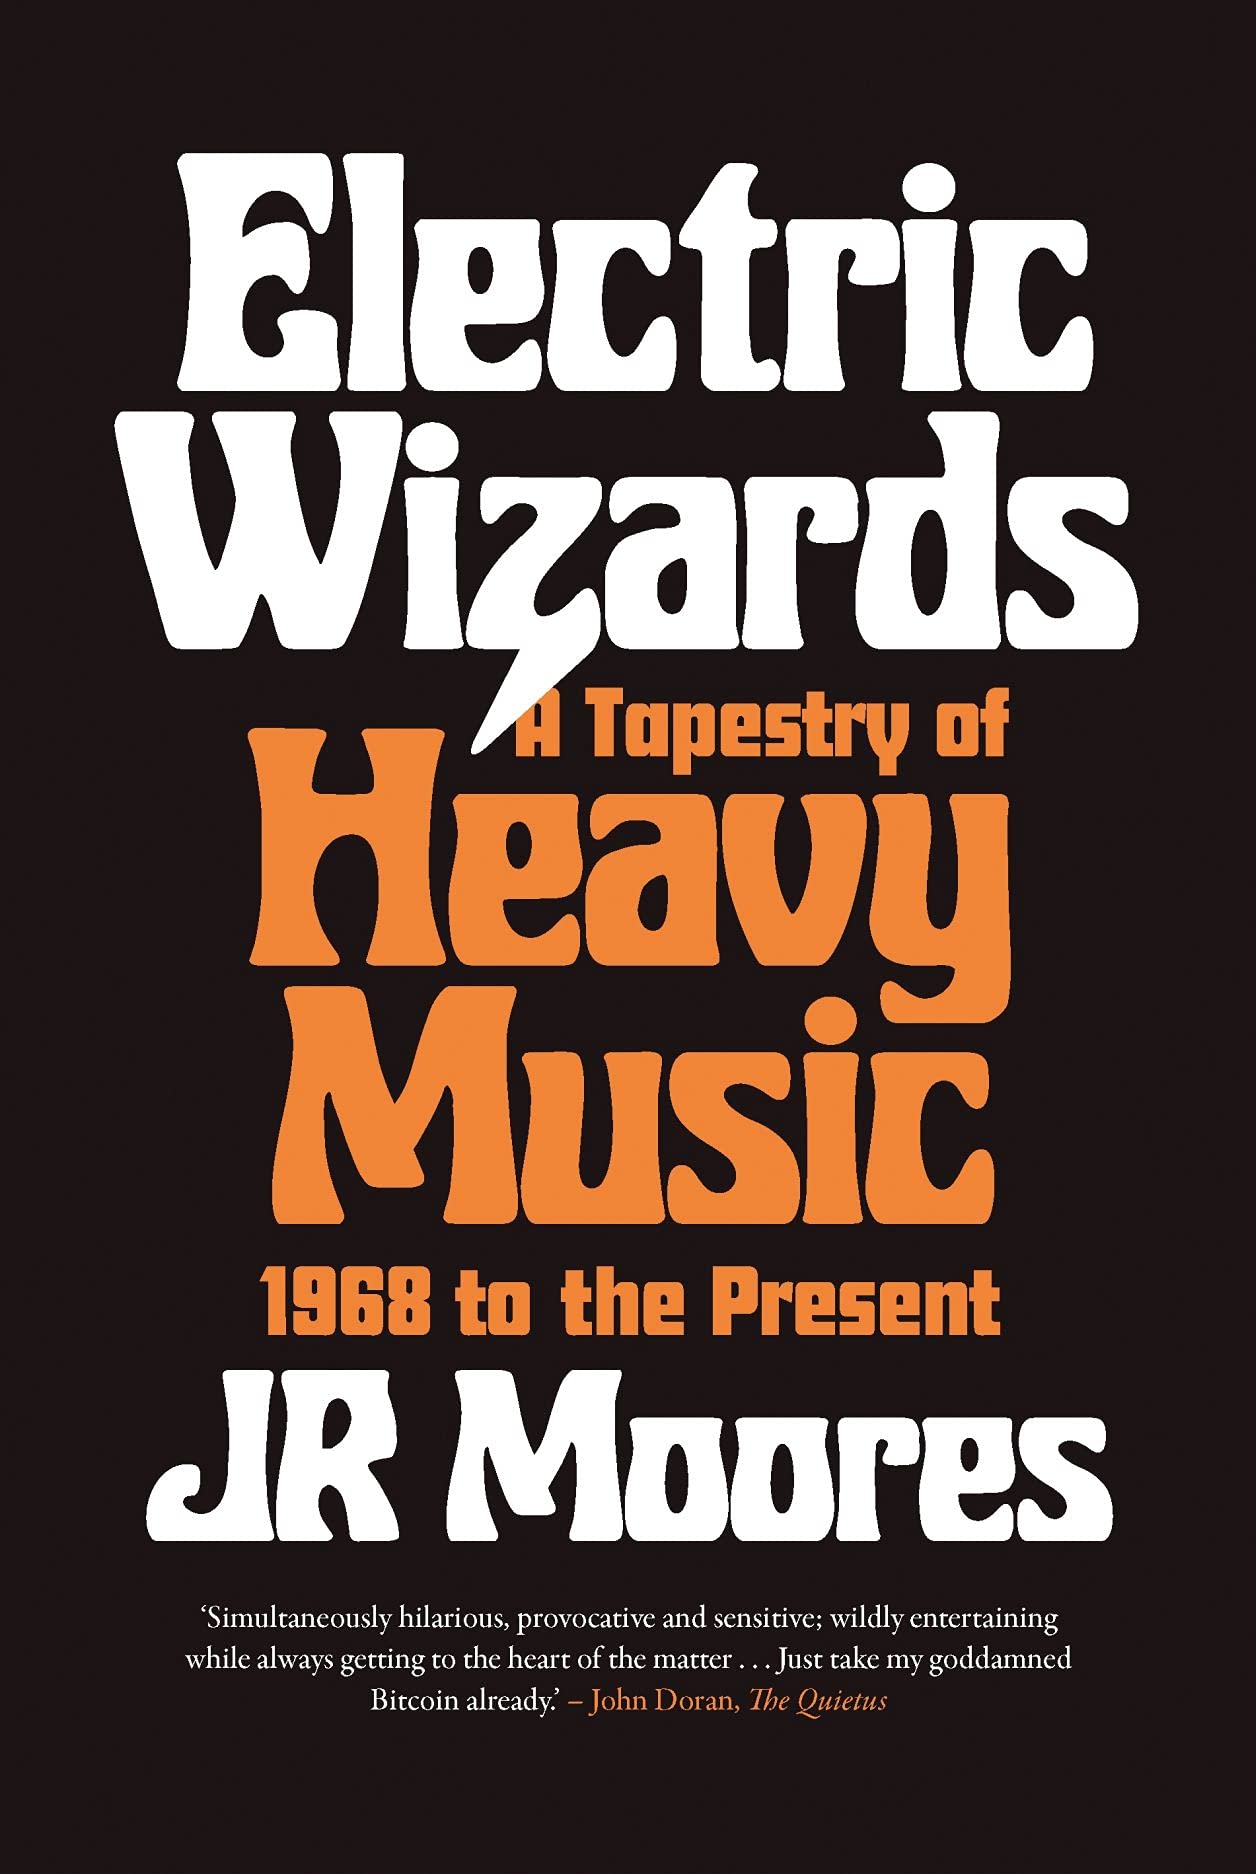 Electric Wizards: A Tapestry of Heavy Music, by JR Moores